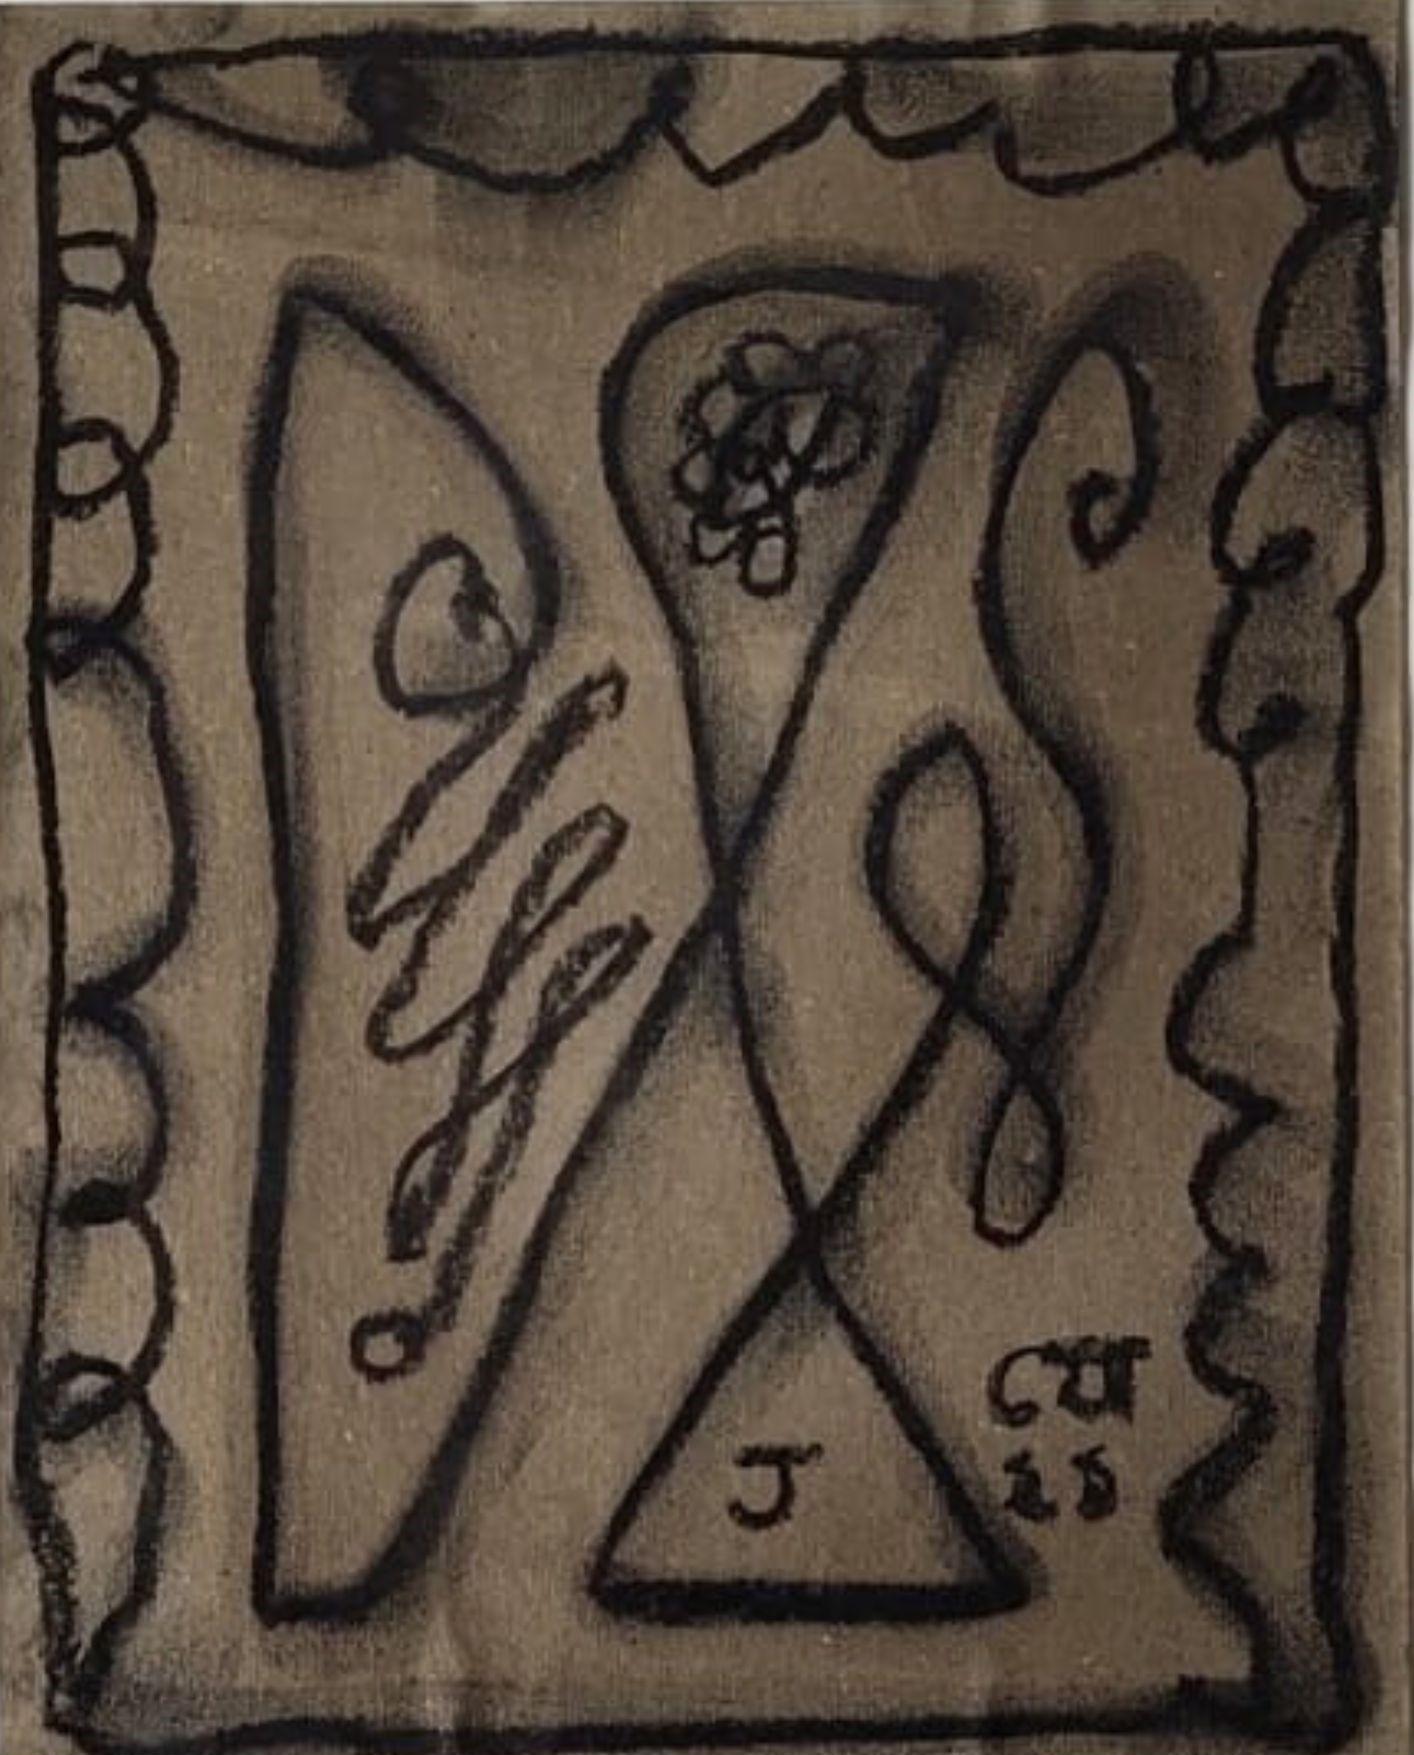 Jogen Chowdhury
Untitled 
Charcoal & Dry Pastel on Brown Paper Pasted on Board
10 x 8 inches 
2021

Style : He has immense contribution in inspiring young artists of India. Jogen Chowdhury had developed his individual style after his return from